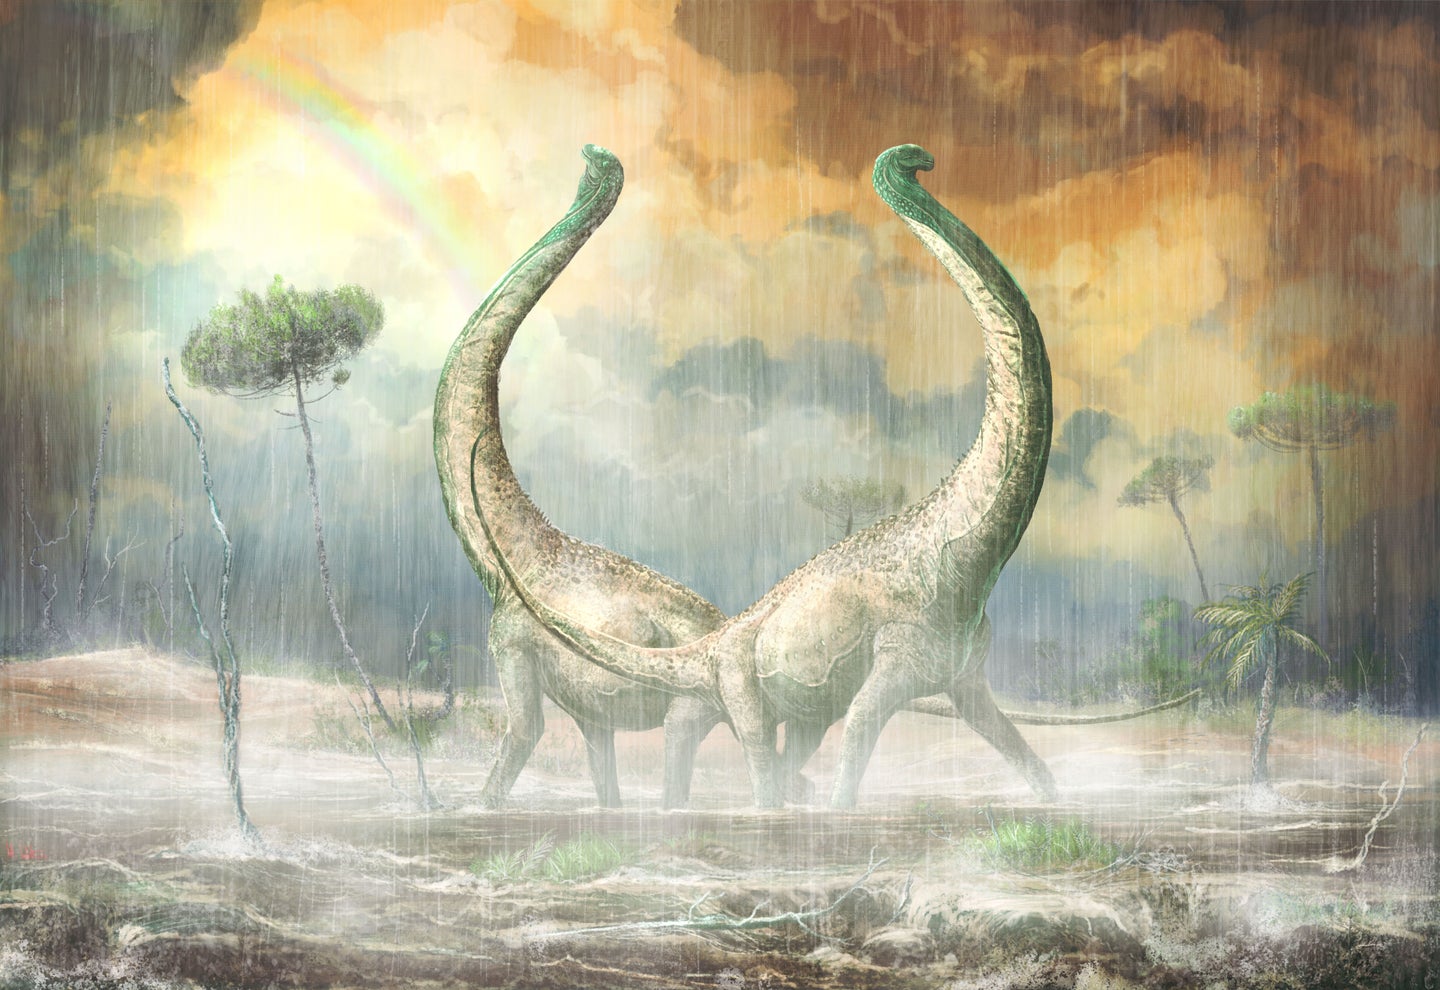 Two long-necked dinosaurs pose together in the rain